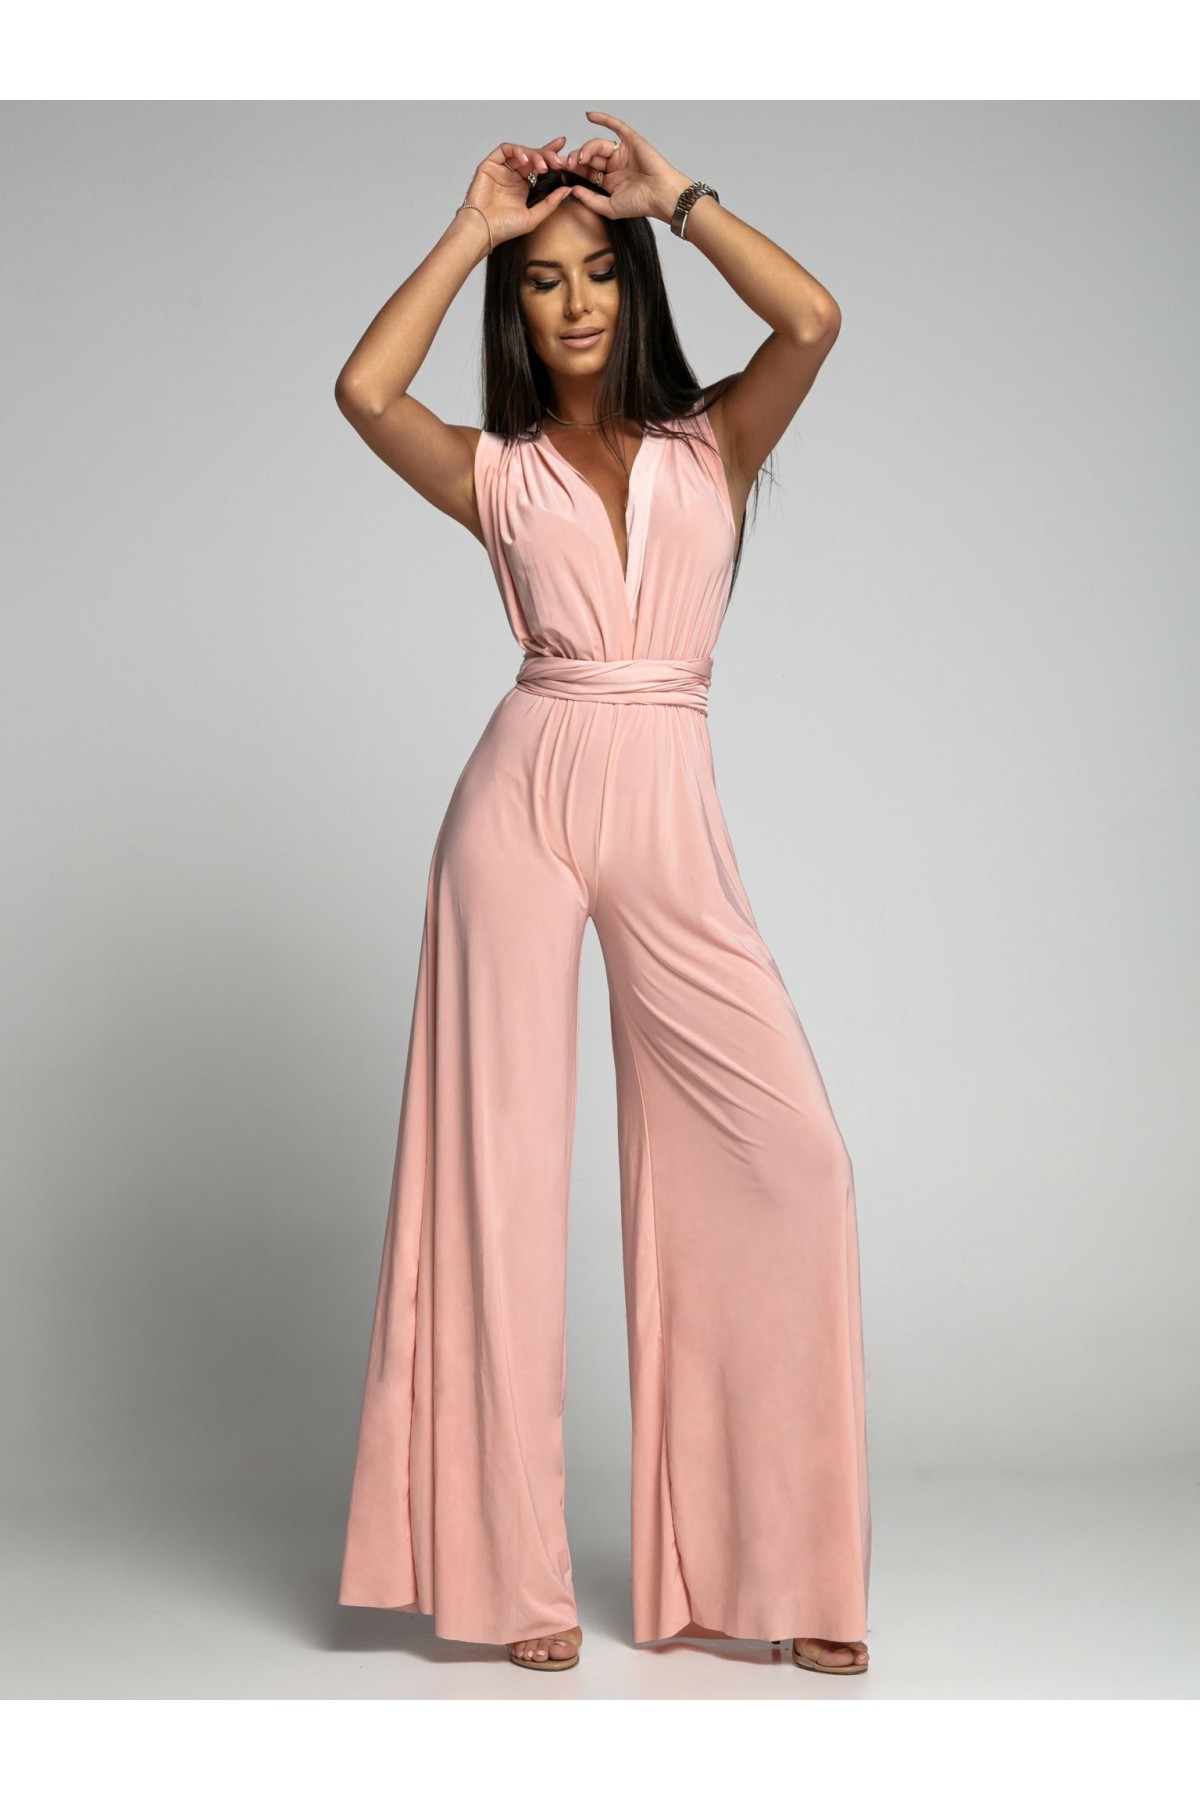 Powder-coloured jumpsuit tied in several ways